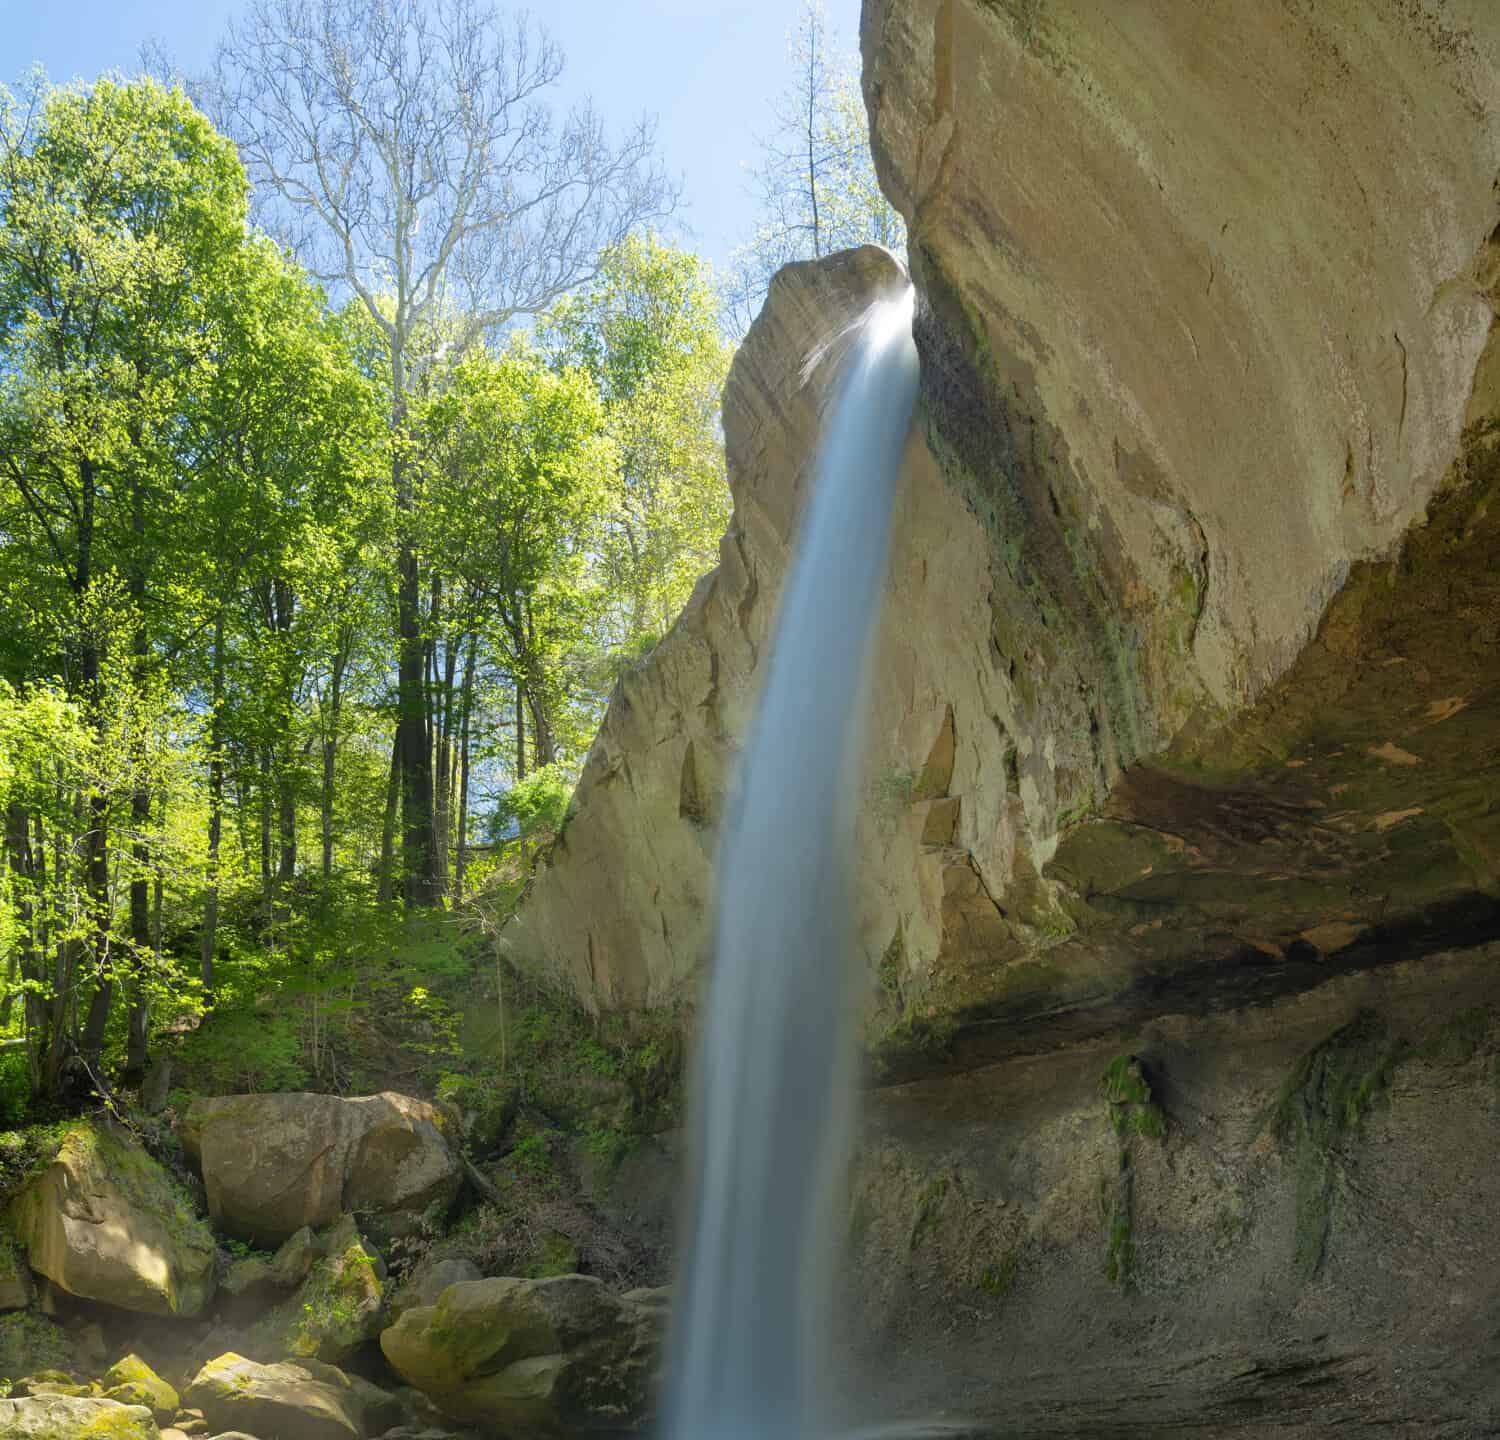 The plunging Williamsport Falls with a height of 90 feet cuts through a narrow spout in the sandstone edge.